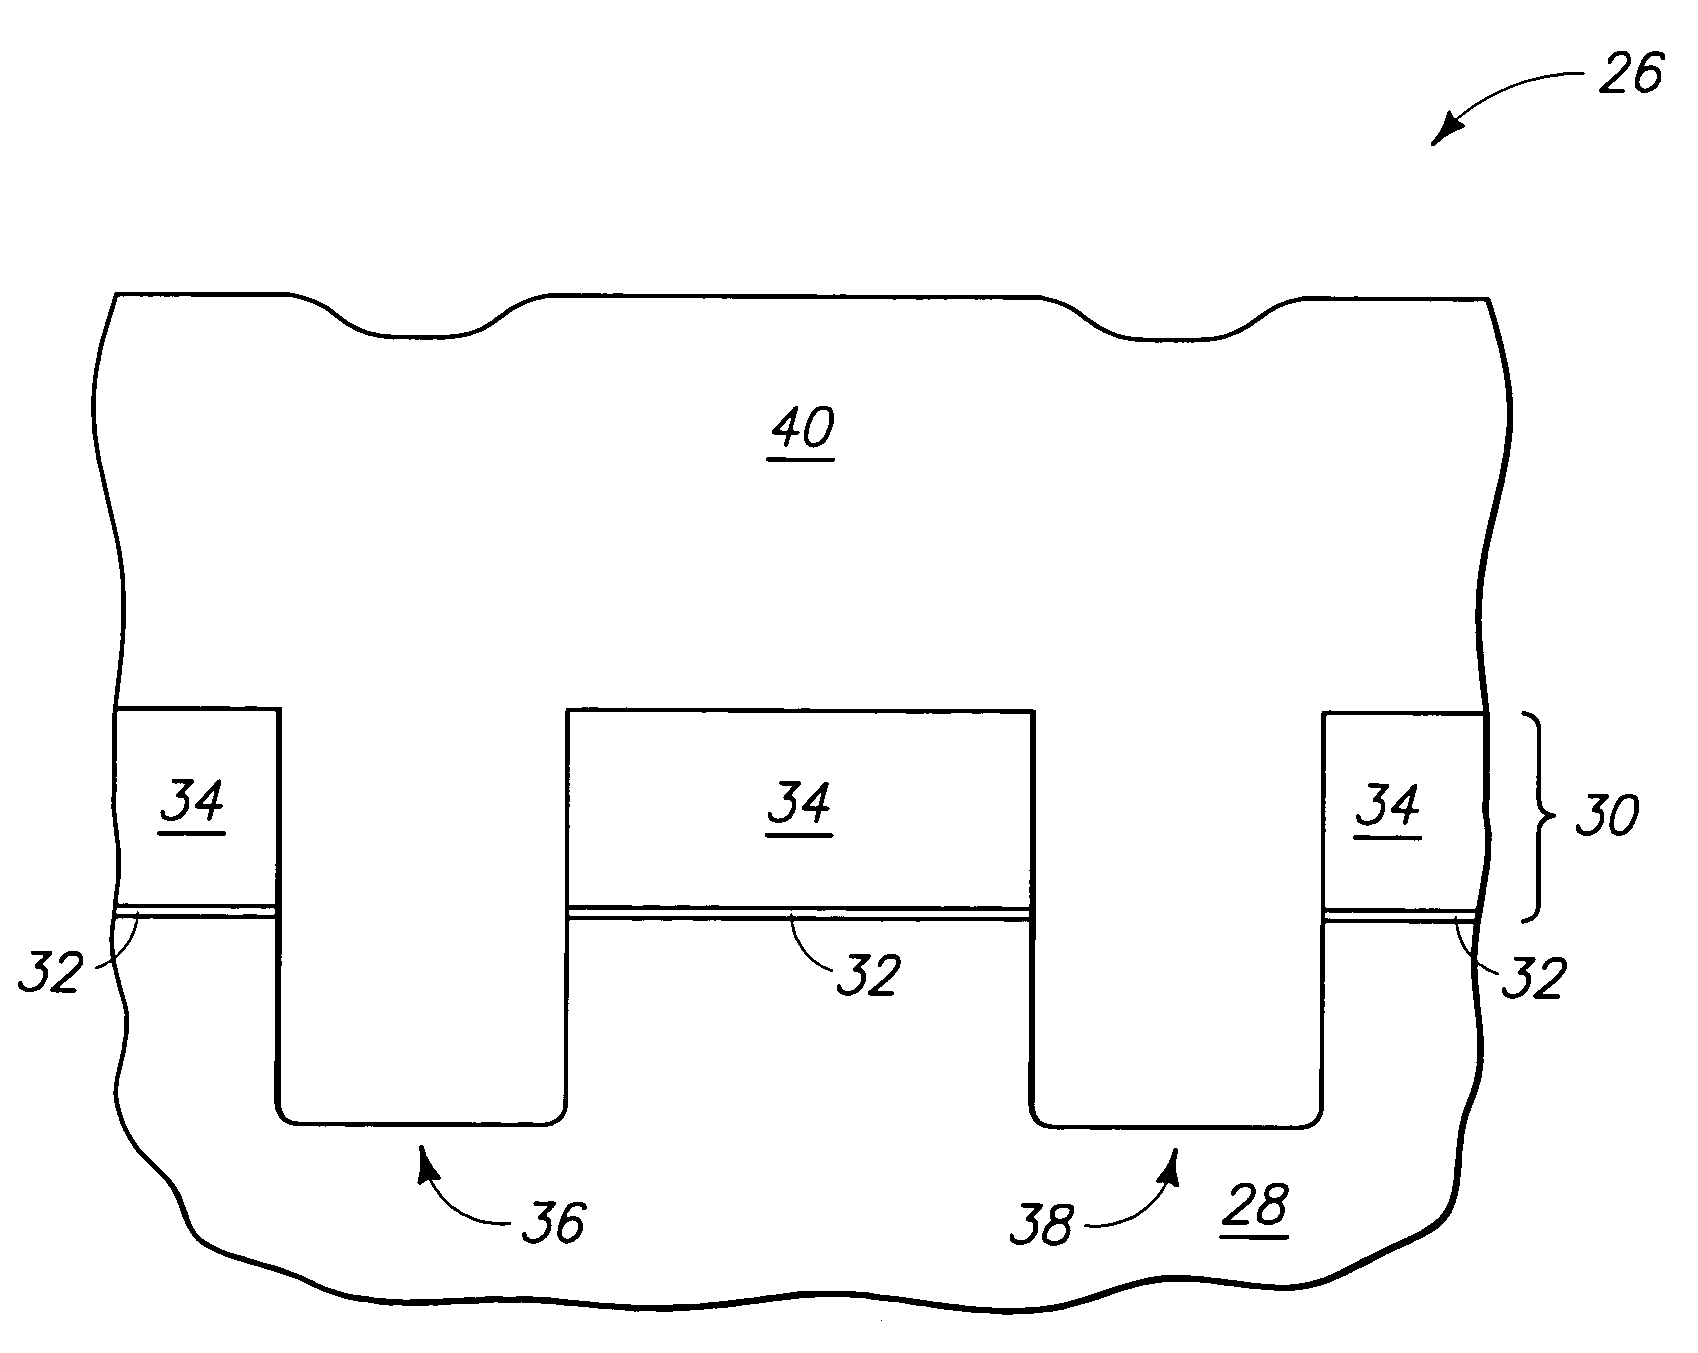 Method of forming trench isolation in the fabrication of integrated circuitry